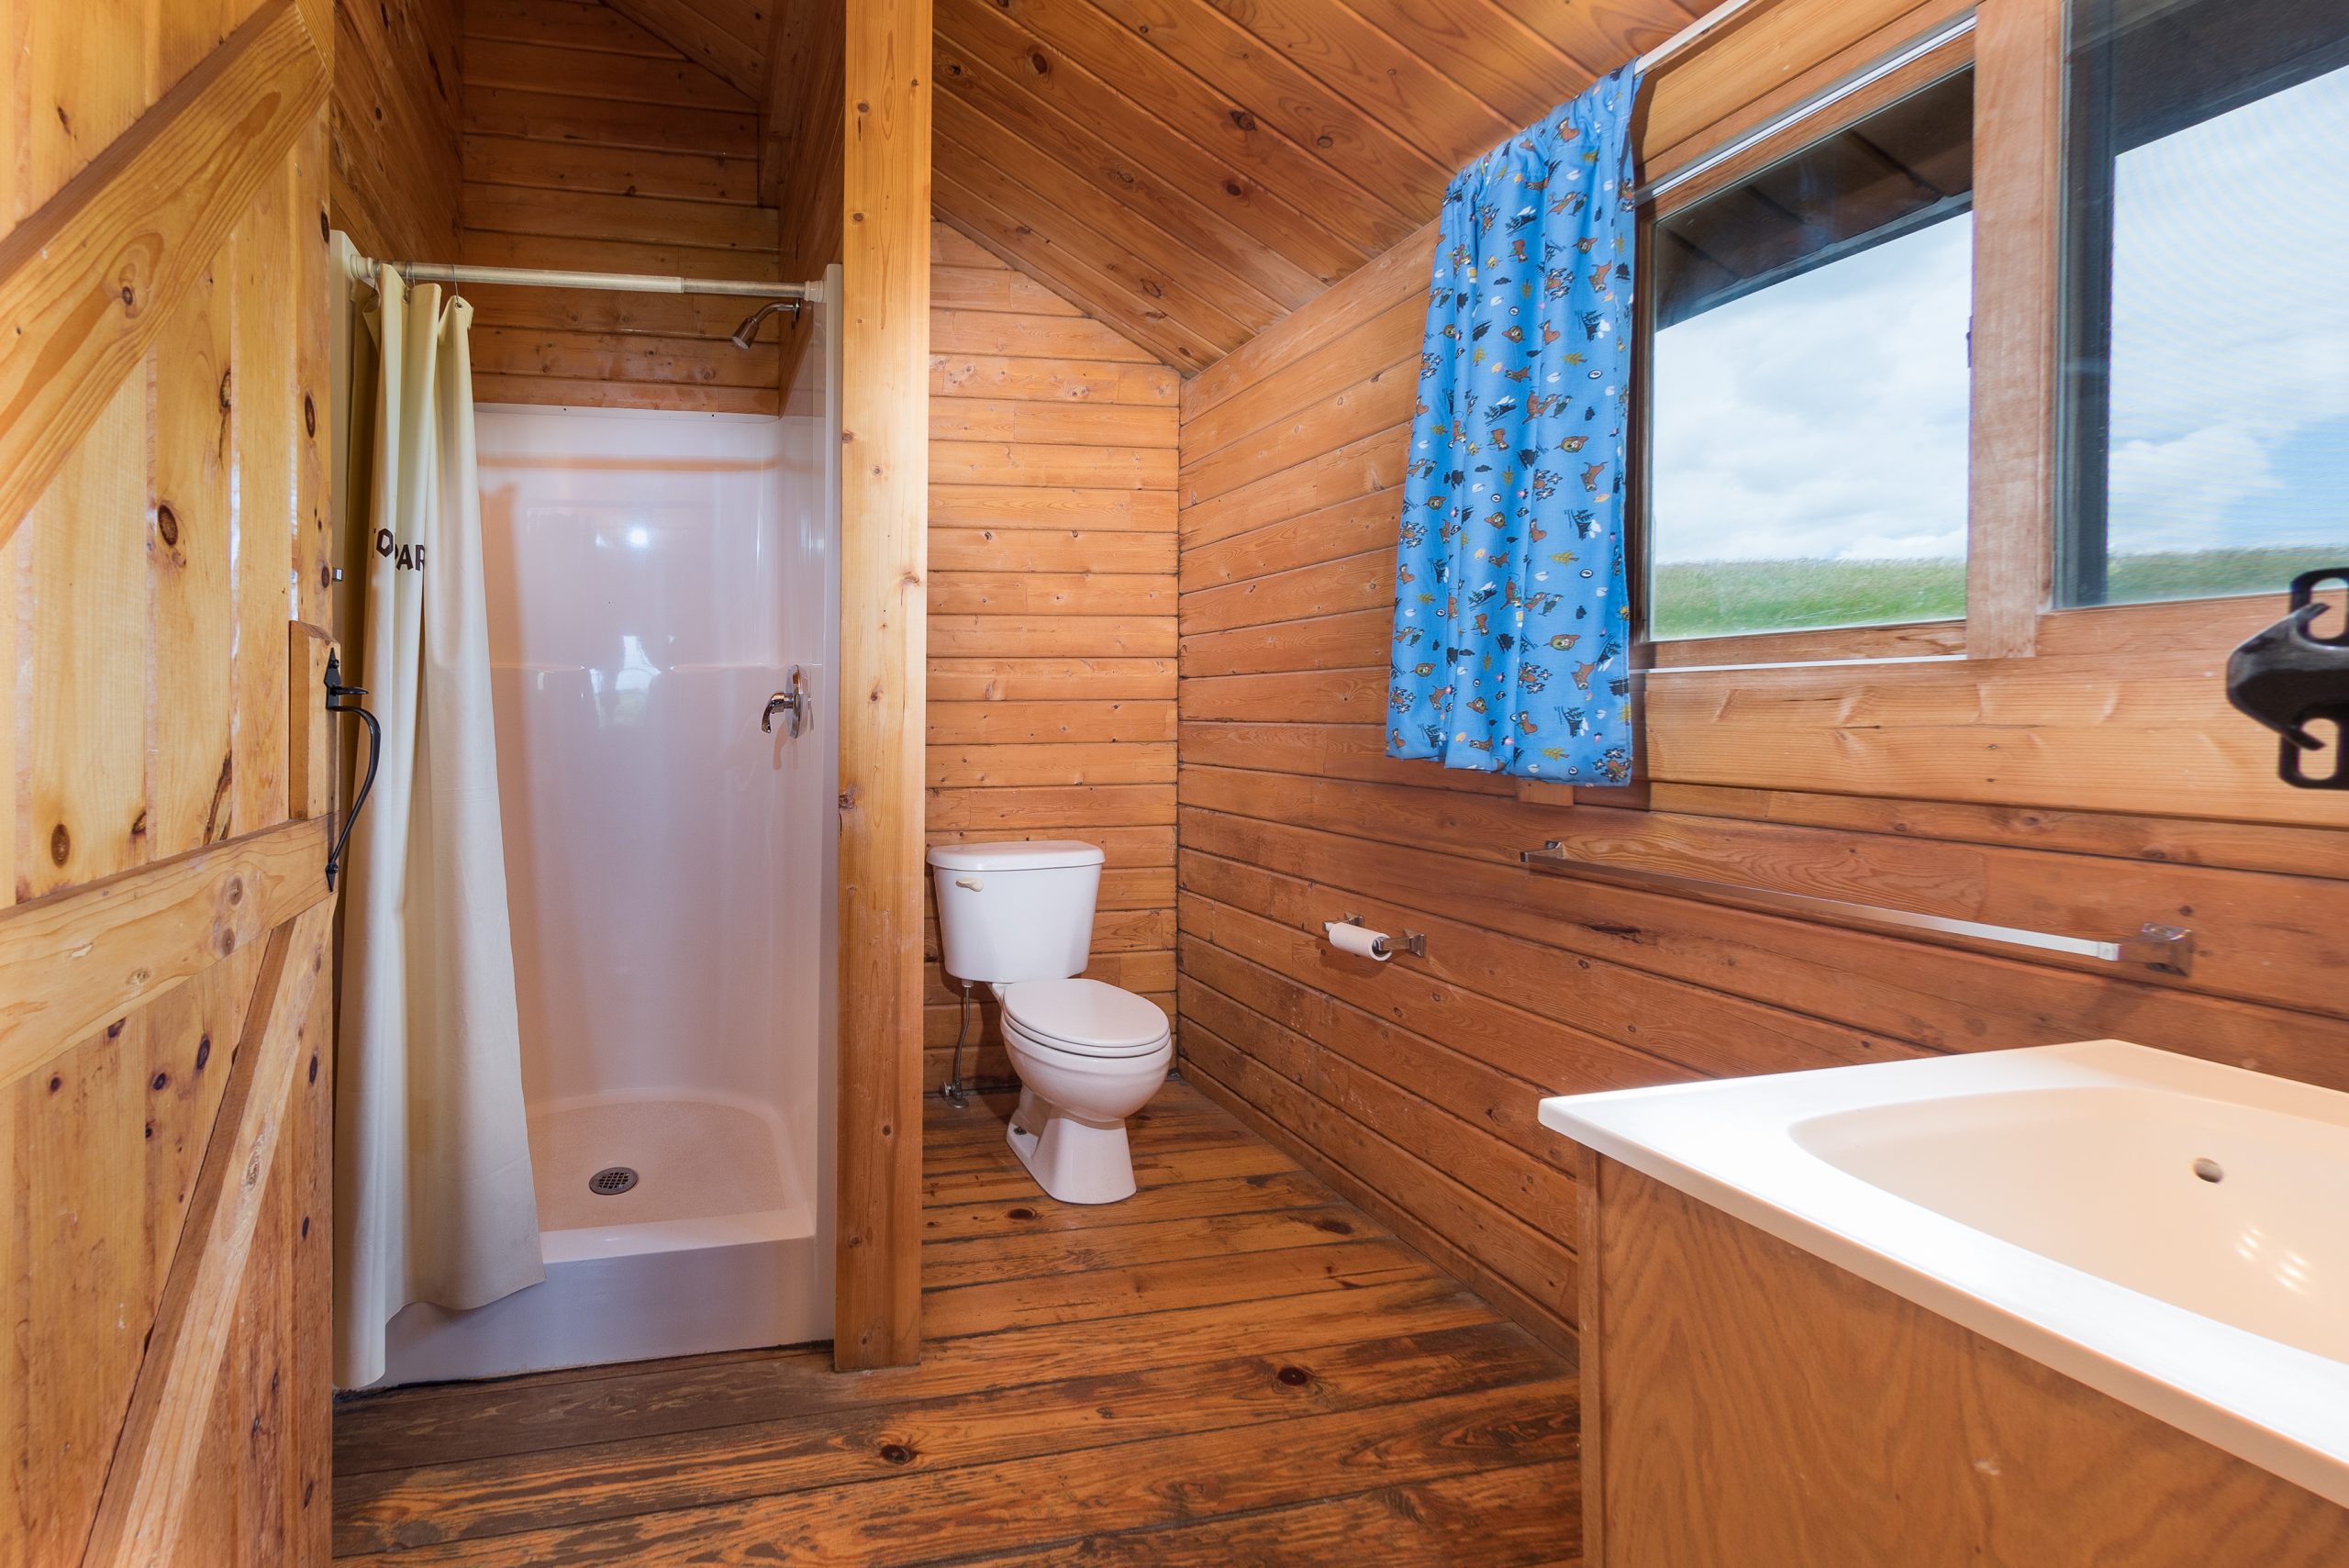 Bungalow Bathroom. Standard sized shower, toilet and sink